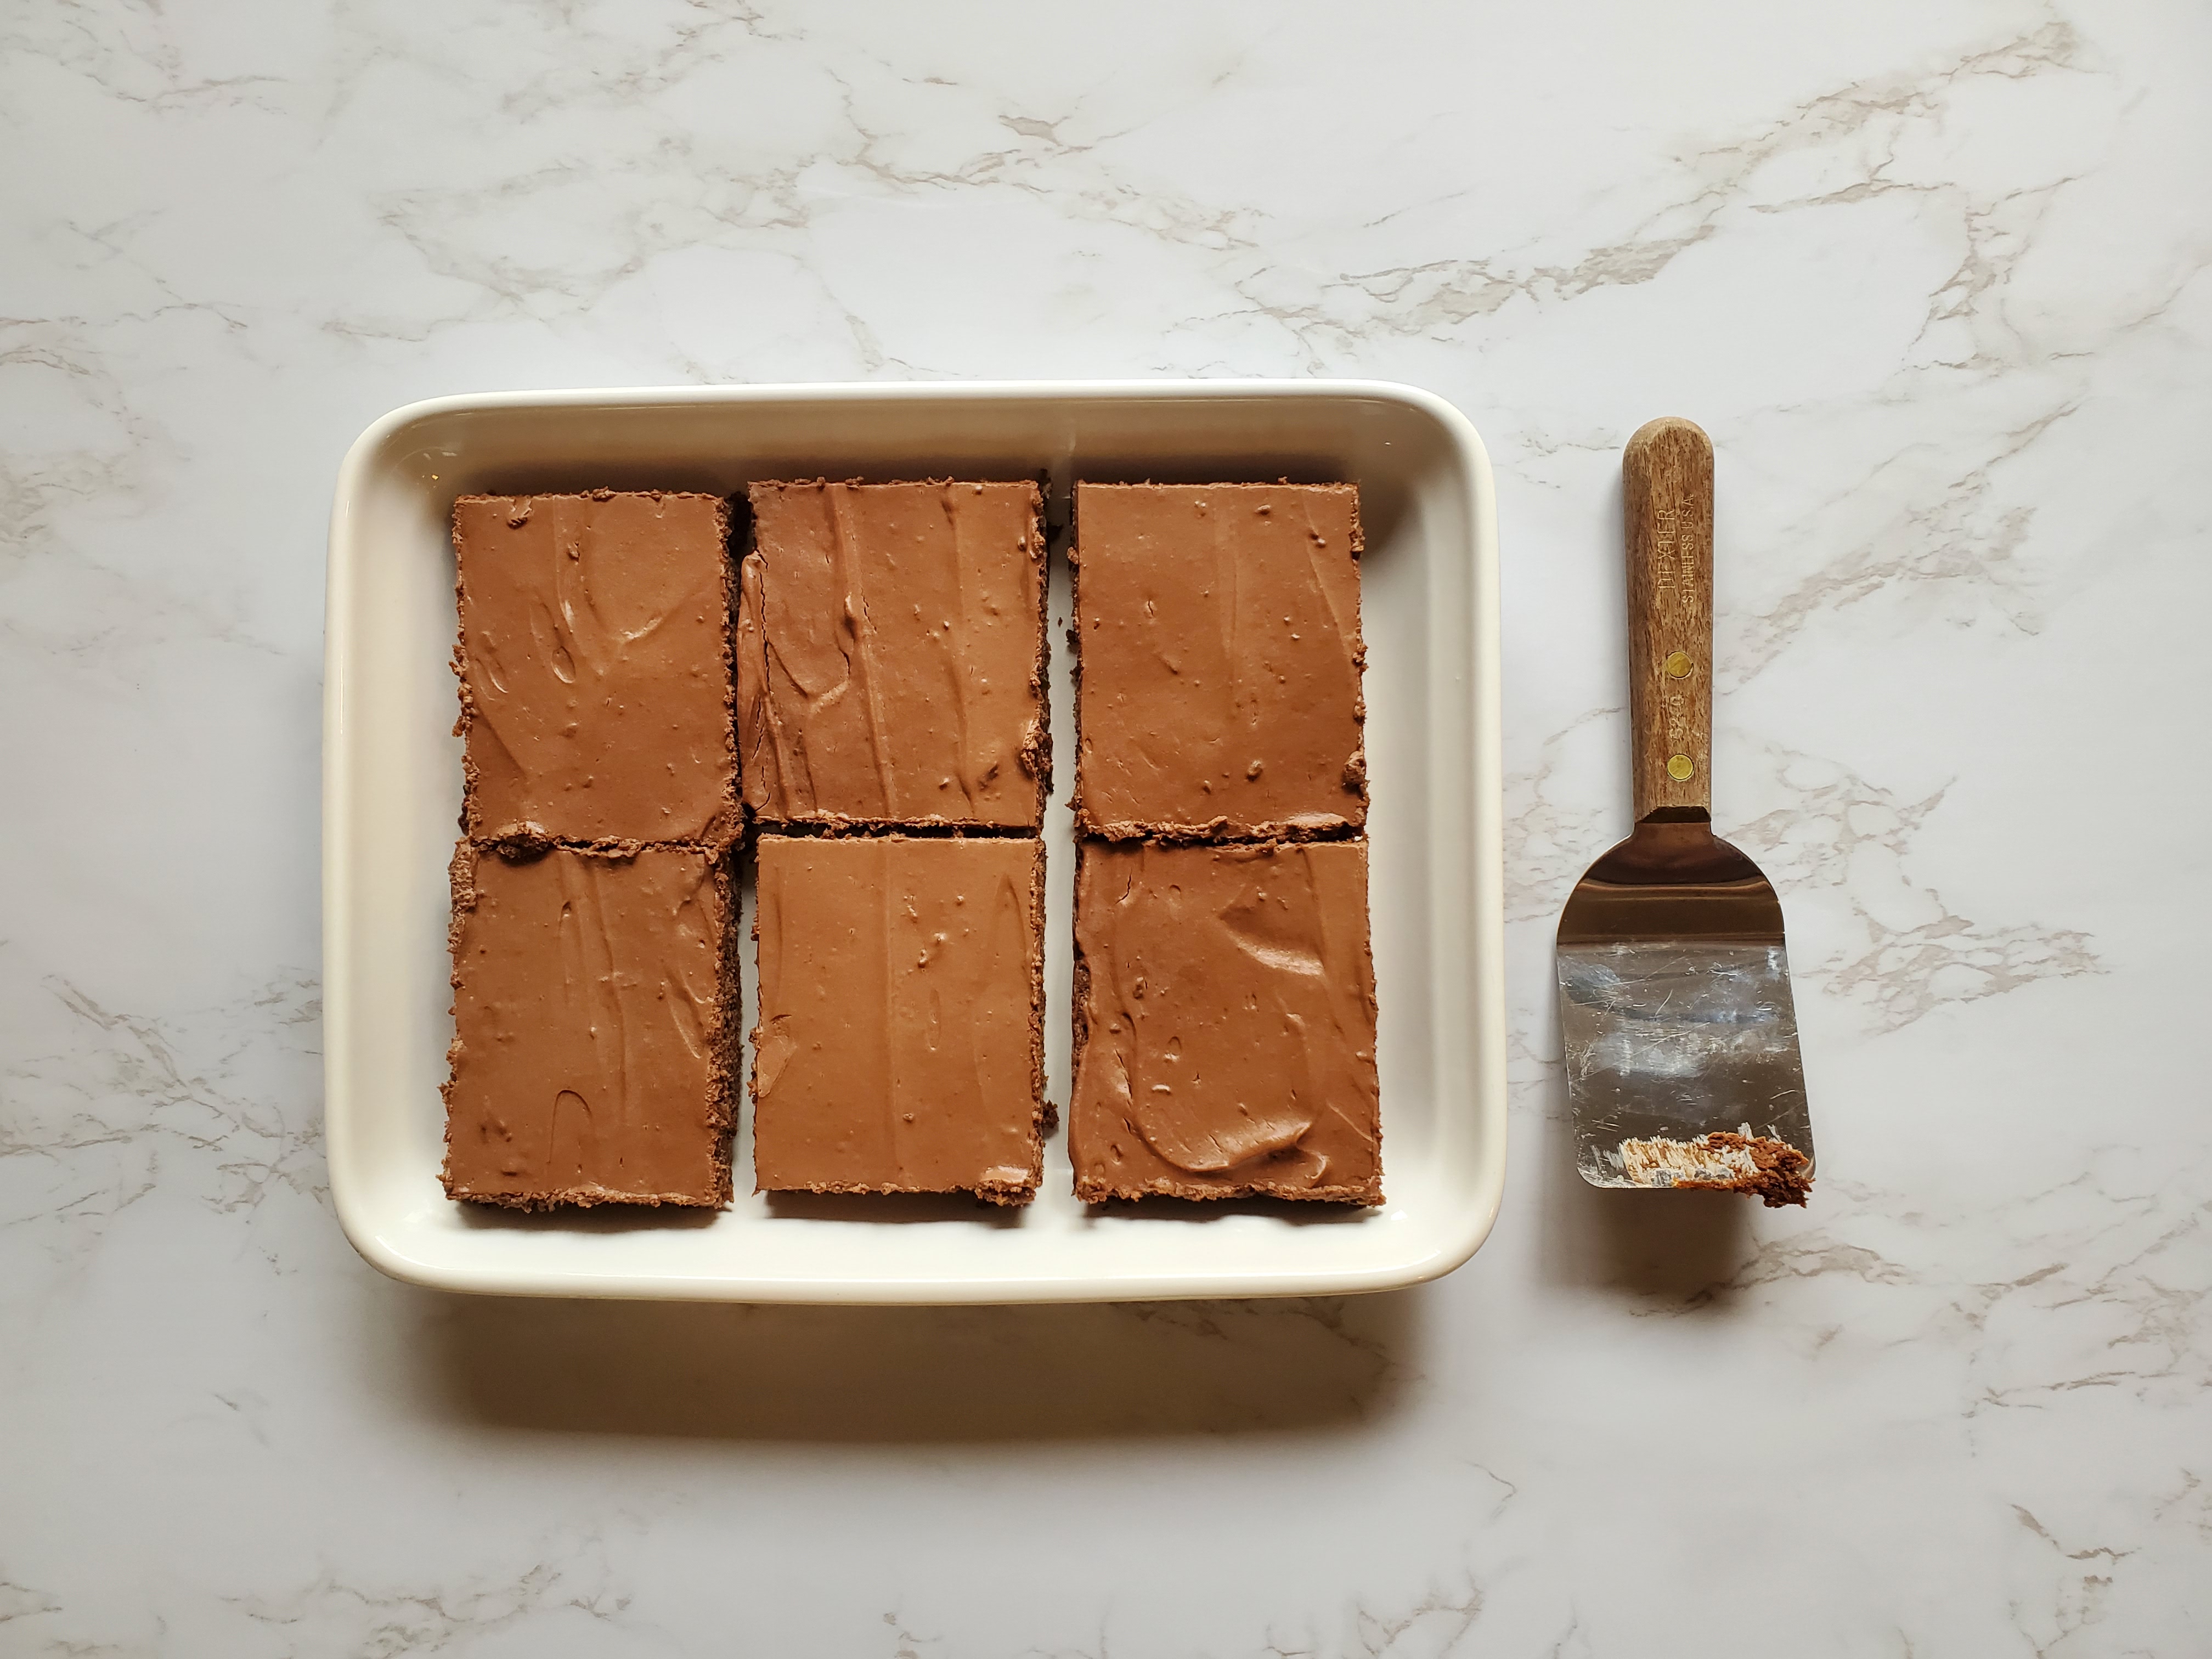 Vegan brownies, cut in squares, on a white tray with a server, on a white marble counter top.